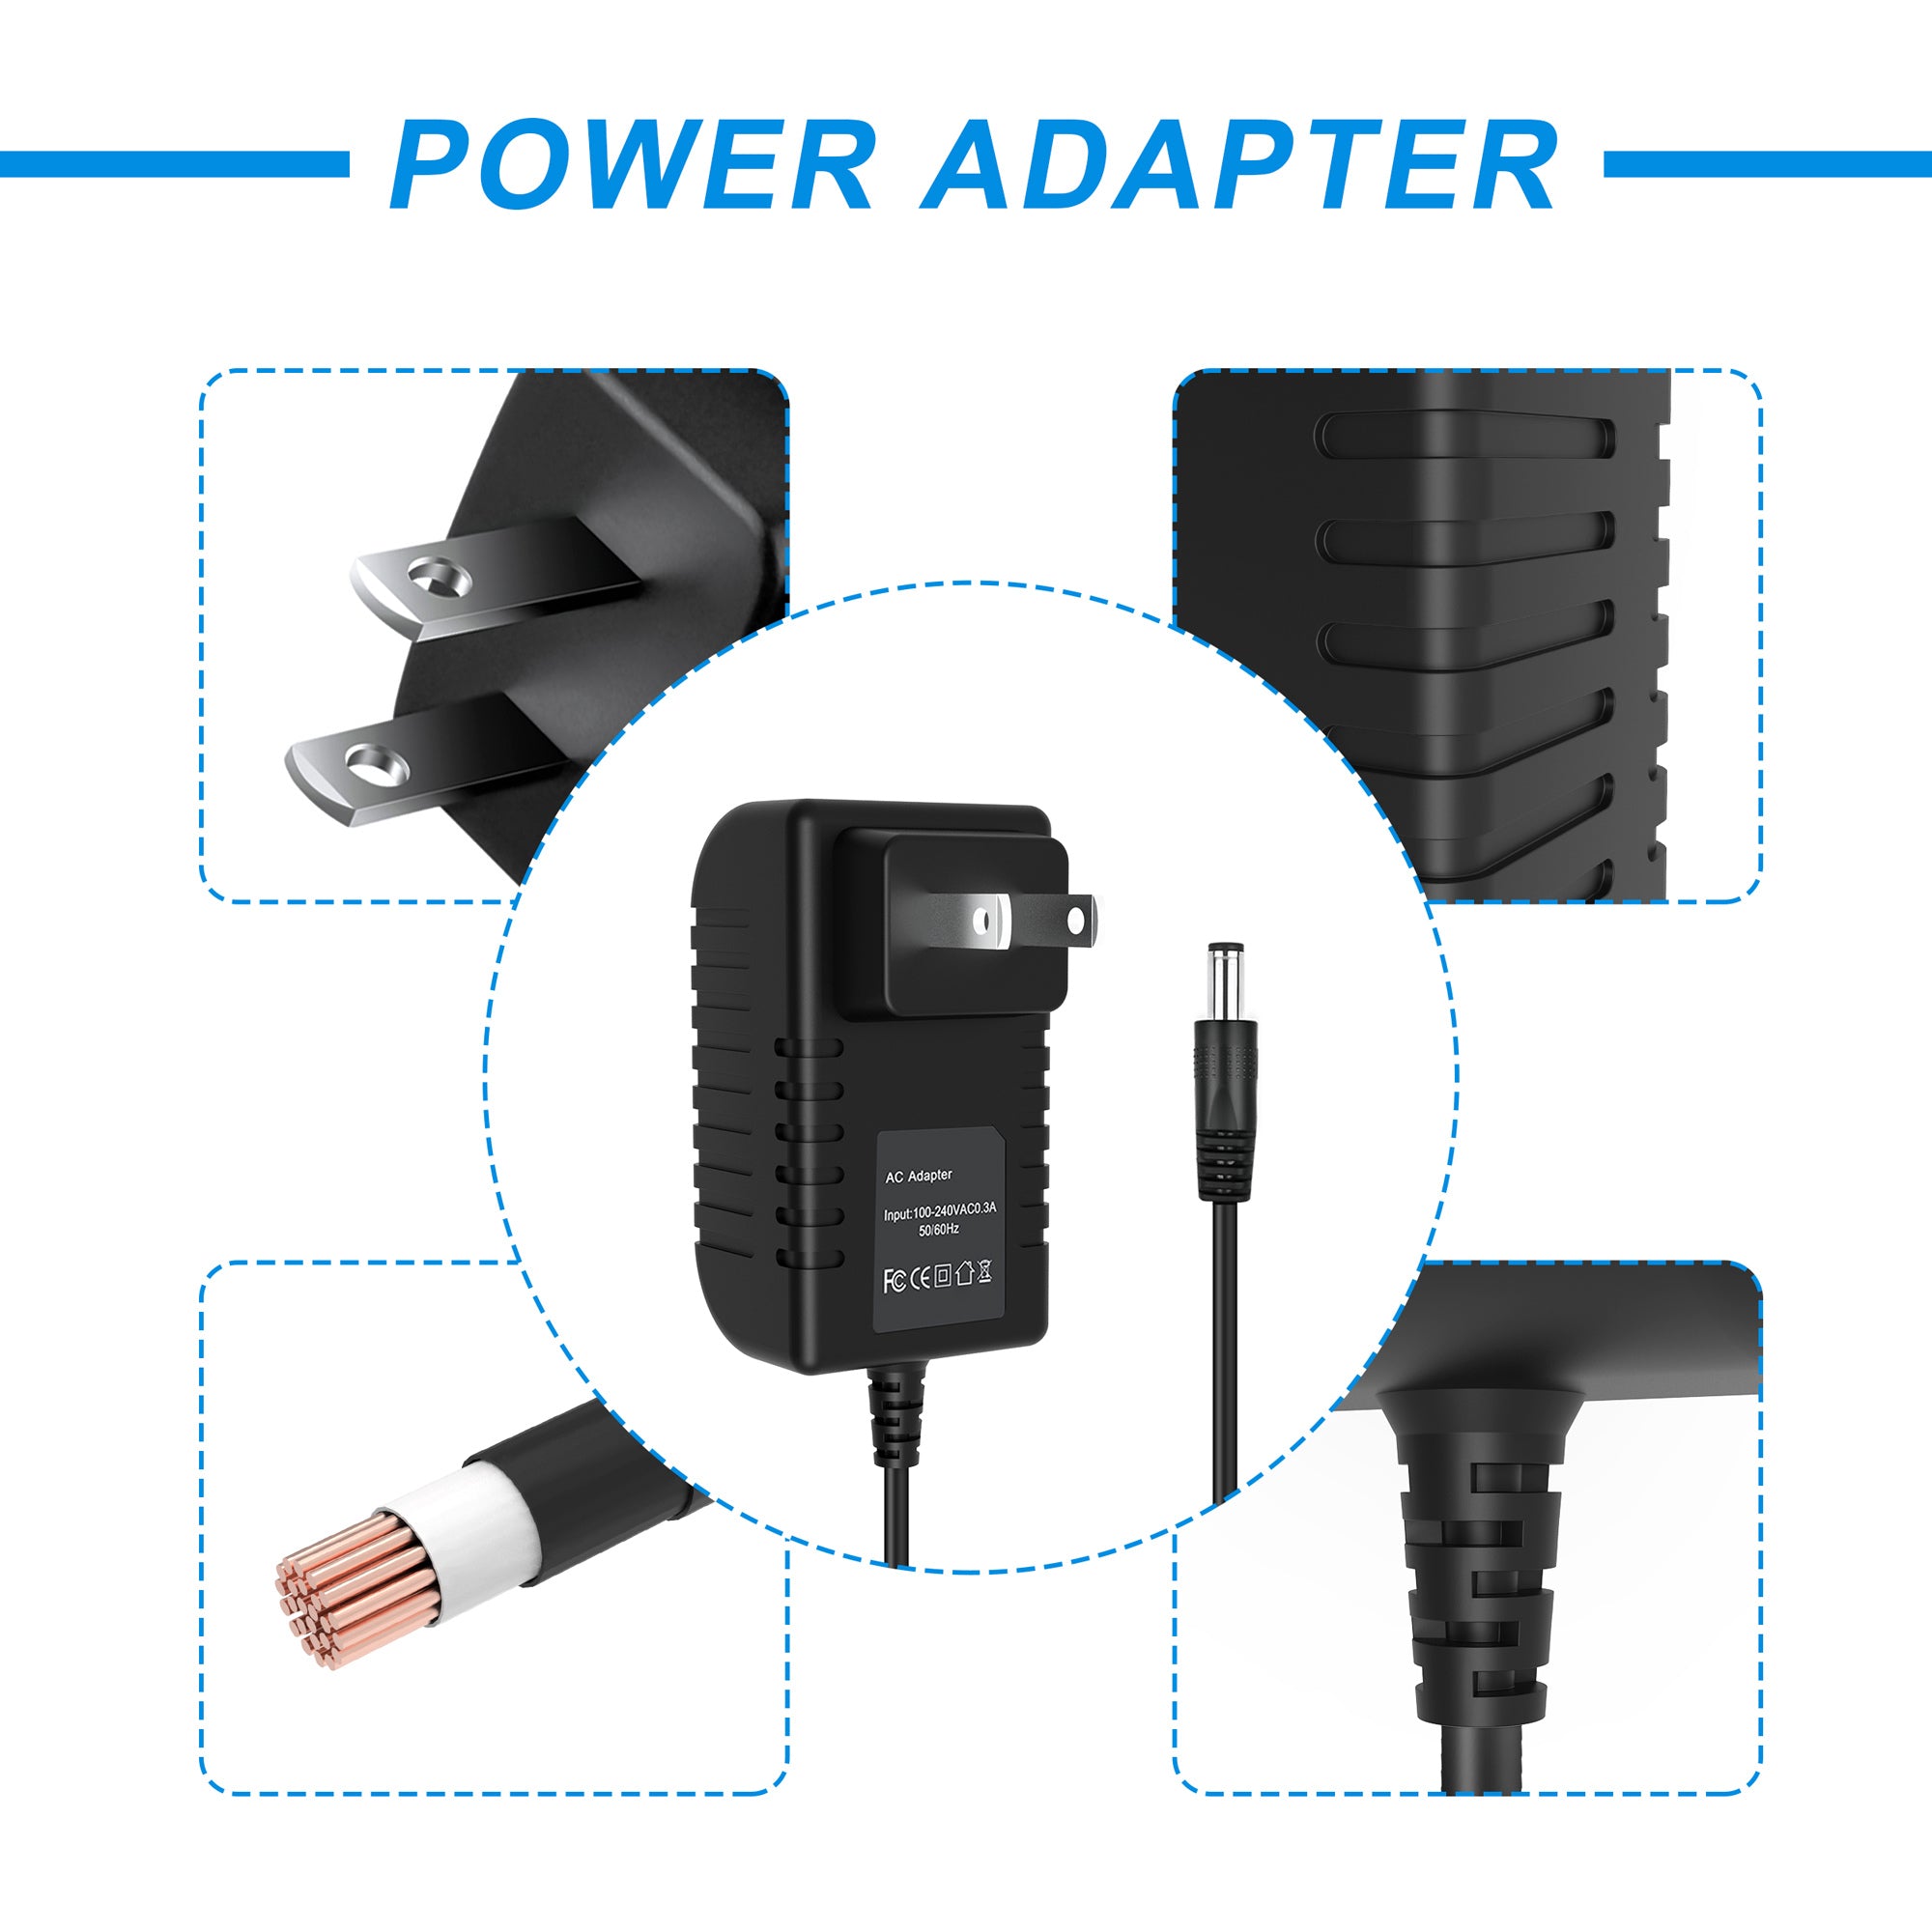 AbleGrid  AC/DC Adapter Compatible with Lifestyler ST 510 831.285760 ST510 831285760, CLUB SX2 831.285641 831285641 Miscellaneous Residential Upright Steppers Life Styler Power Supply Cord Battery Charger